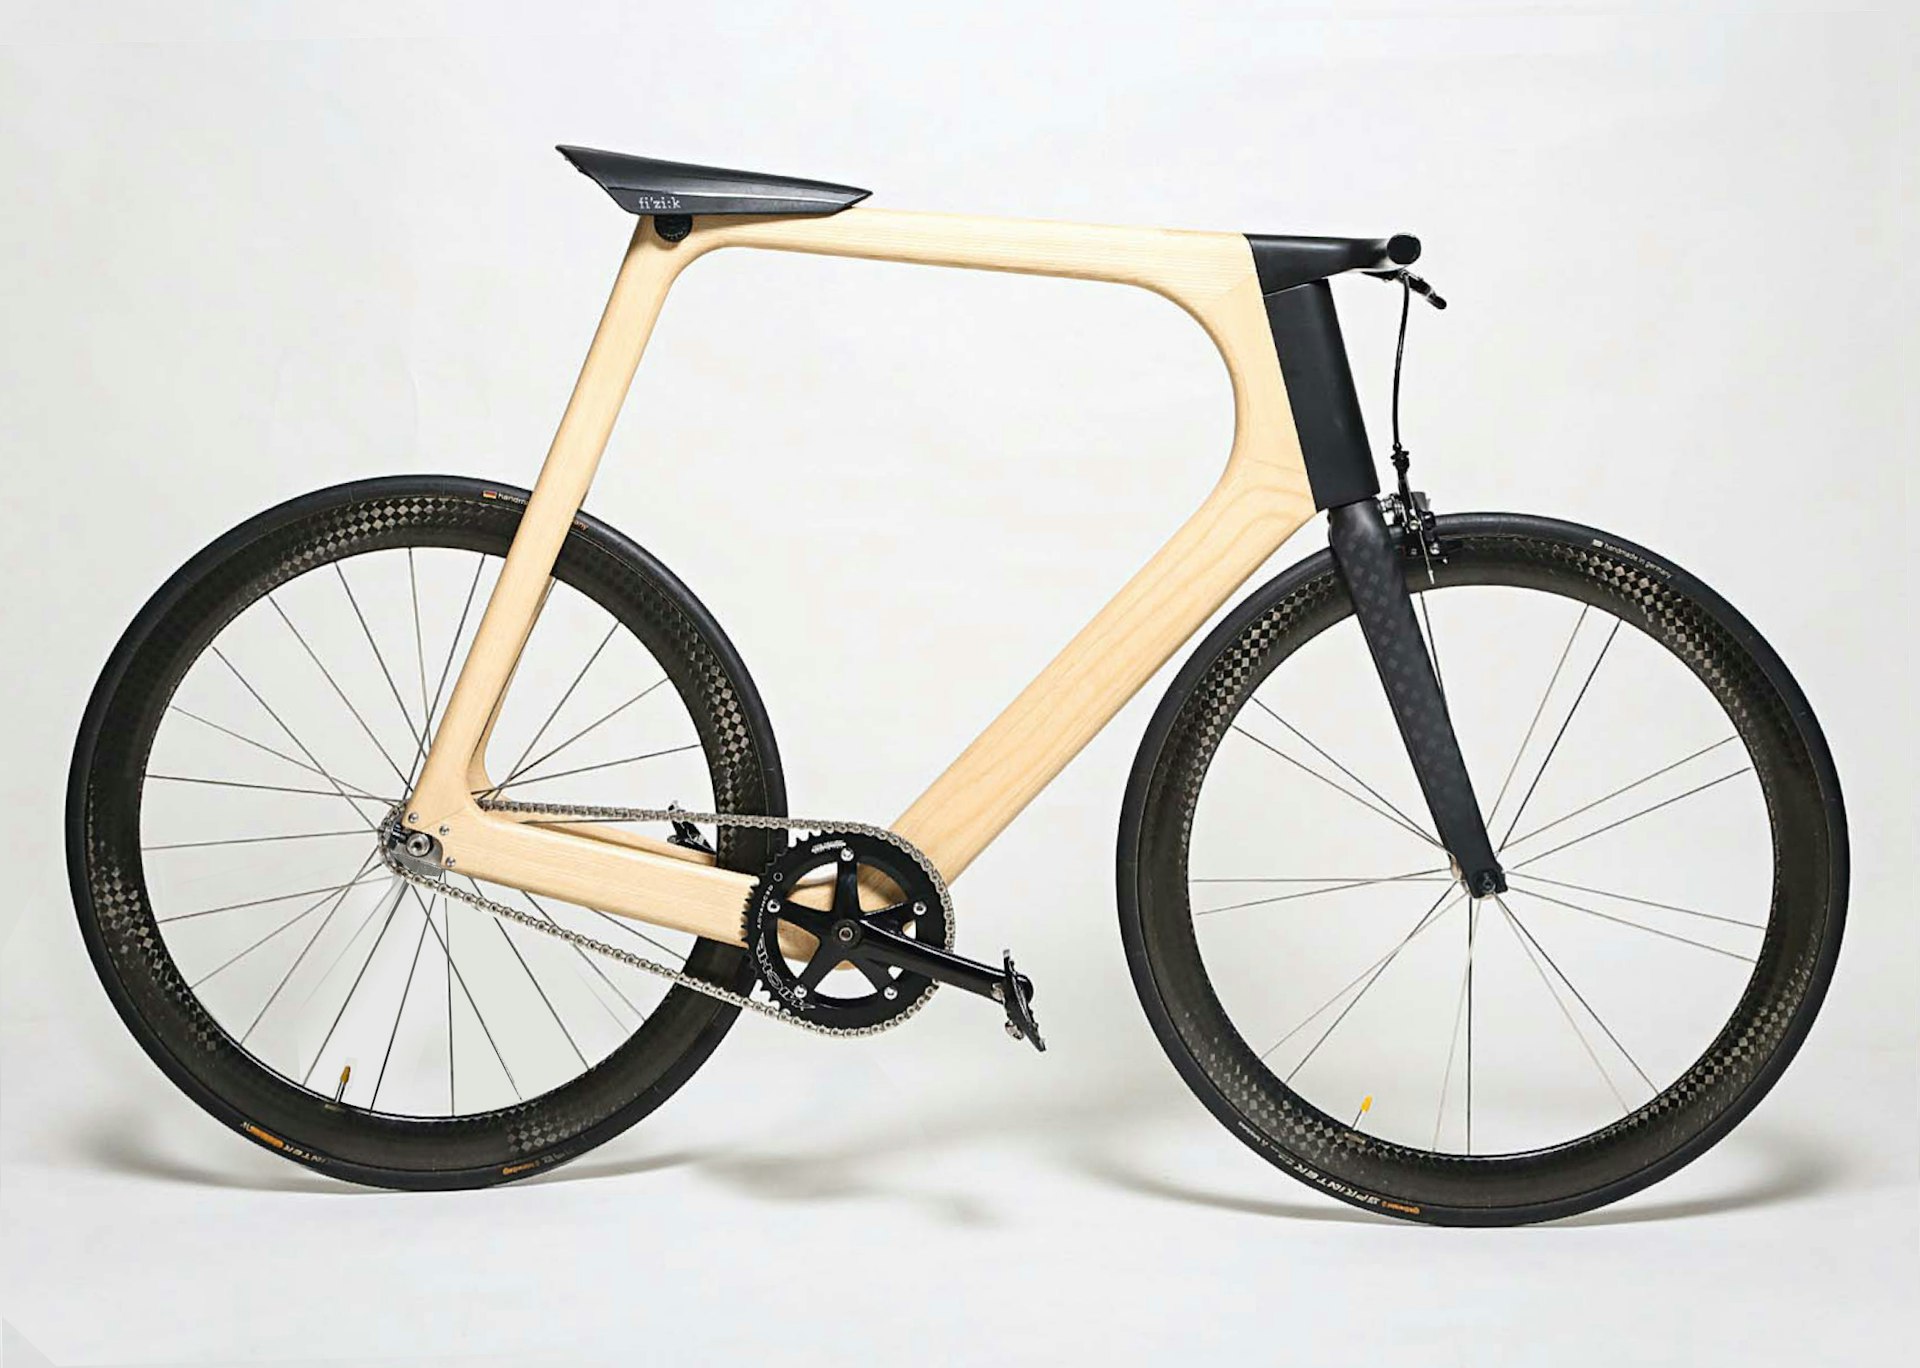 In Pictures: Weird and cutting-edge bike designs that will blow your mind